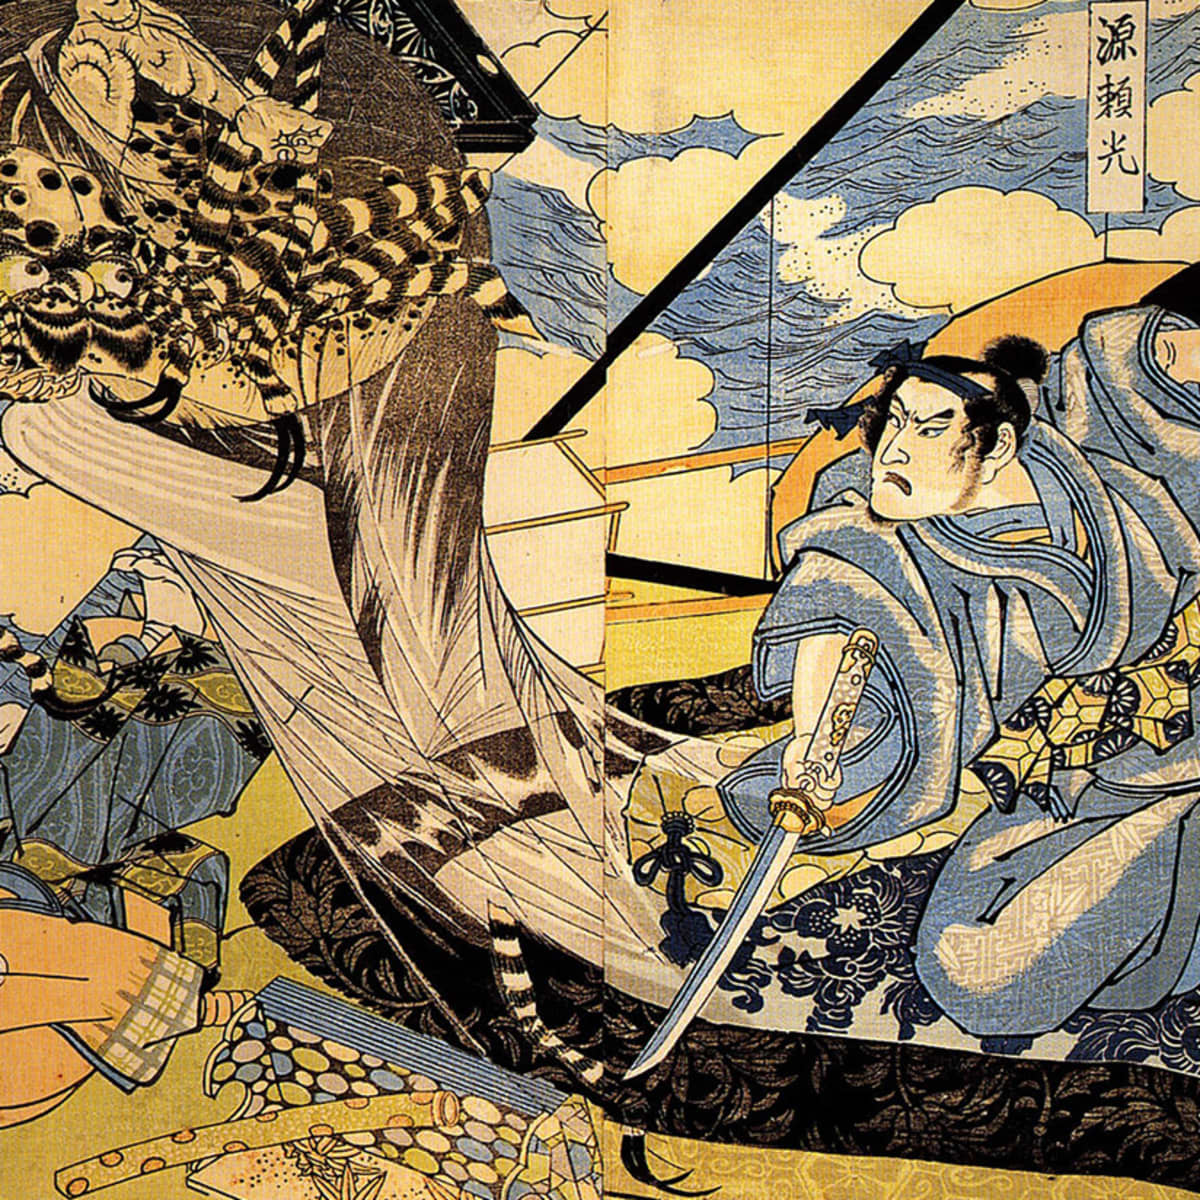 15 Magical Weapons From Japanese Mythology to Know About - Owlcation